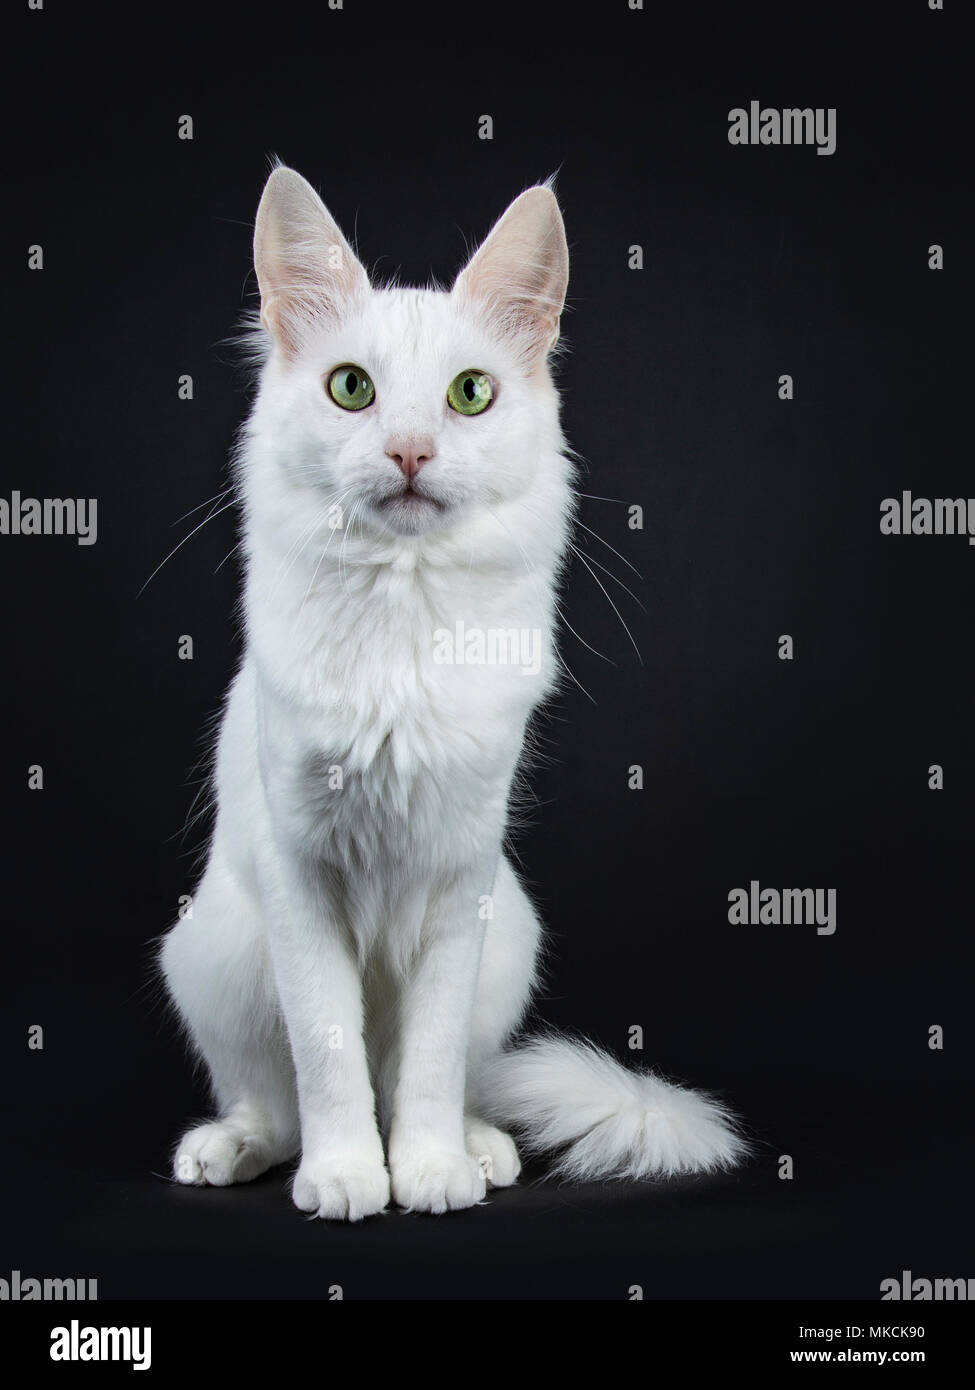 Solid white Turkish Angora cat with green eyes sitting facing front isolated on black background looking directly at camera Stock Photo